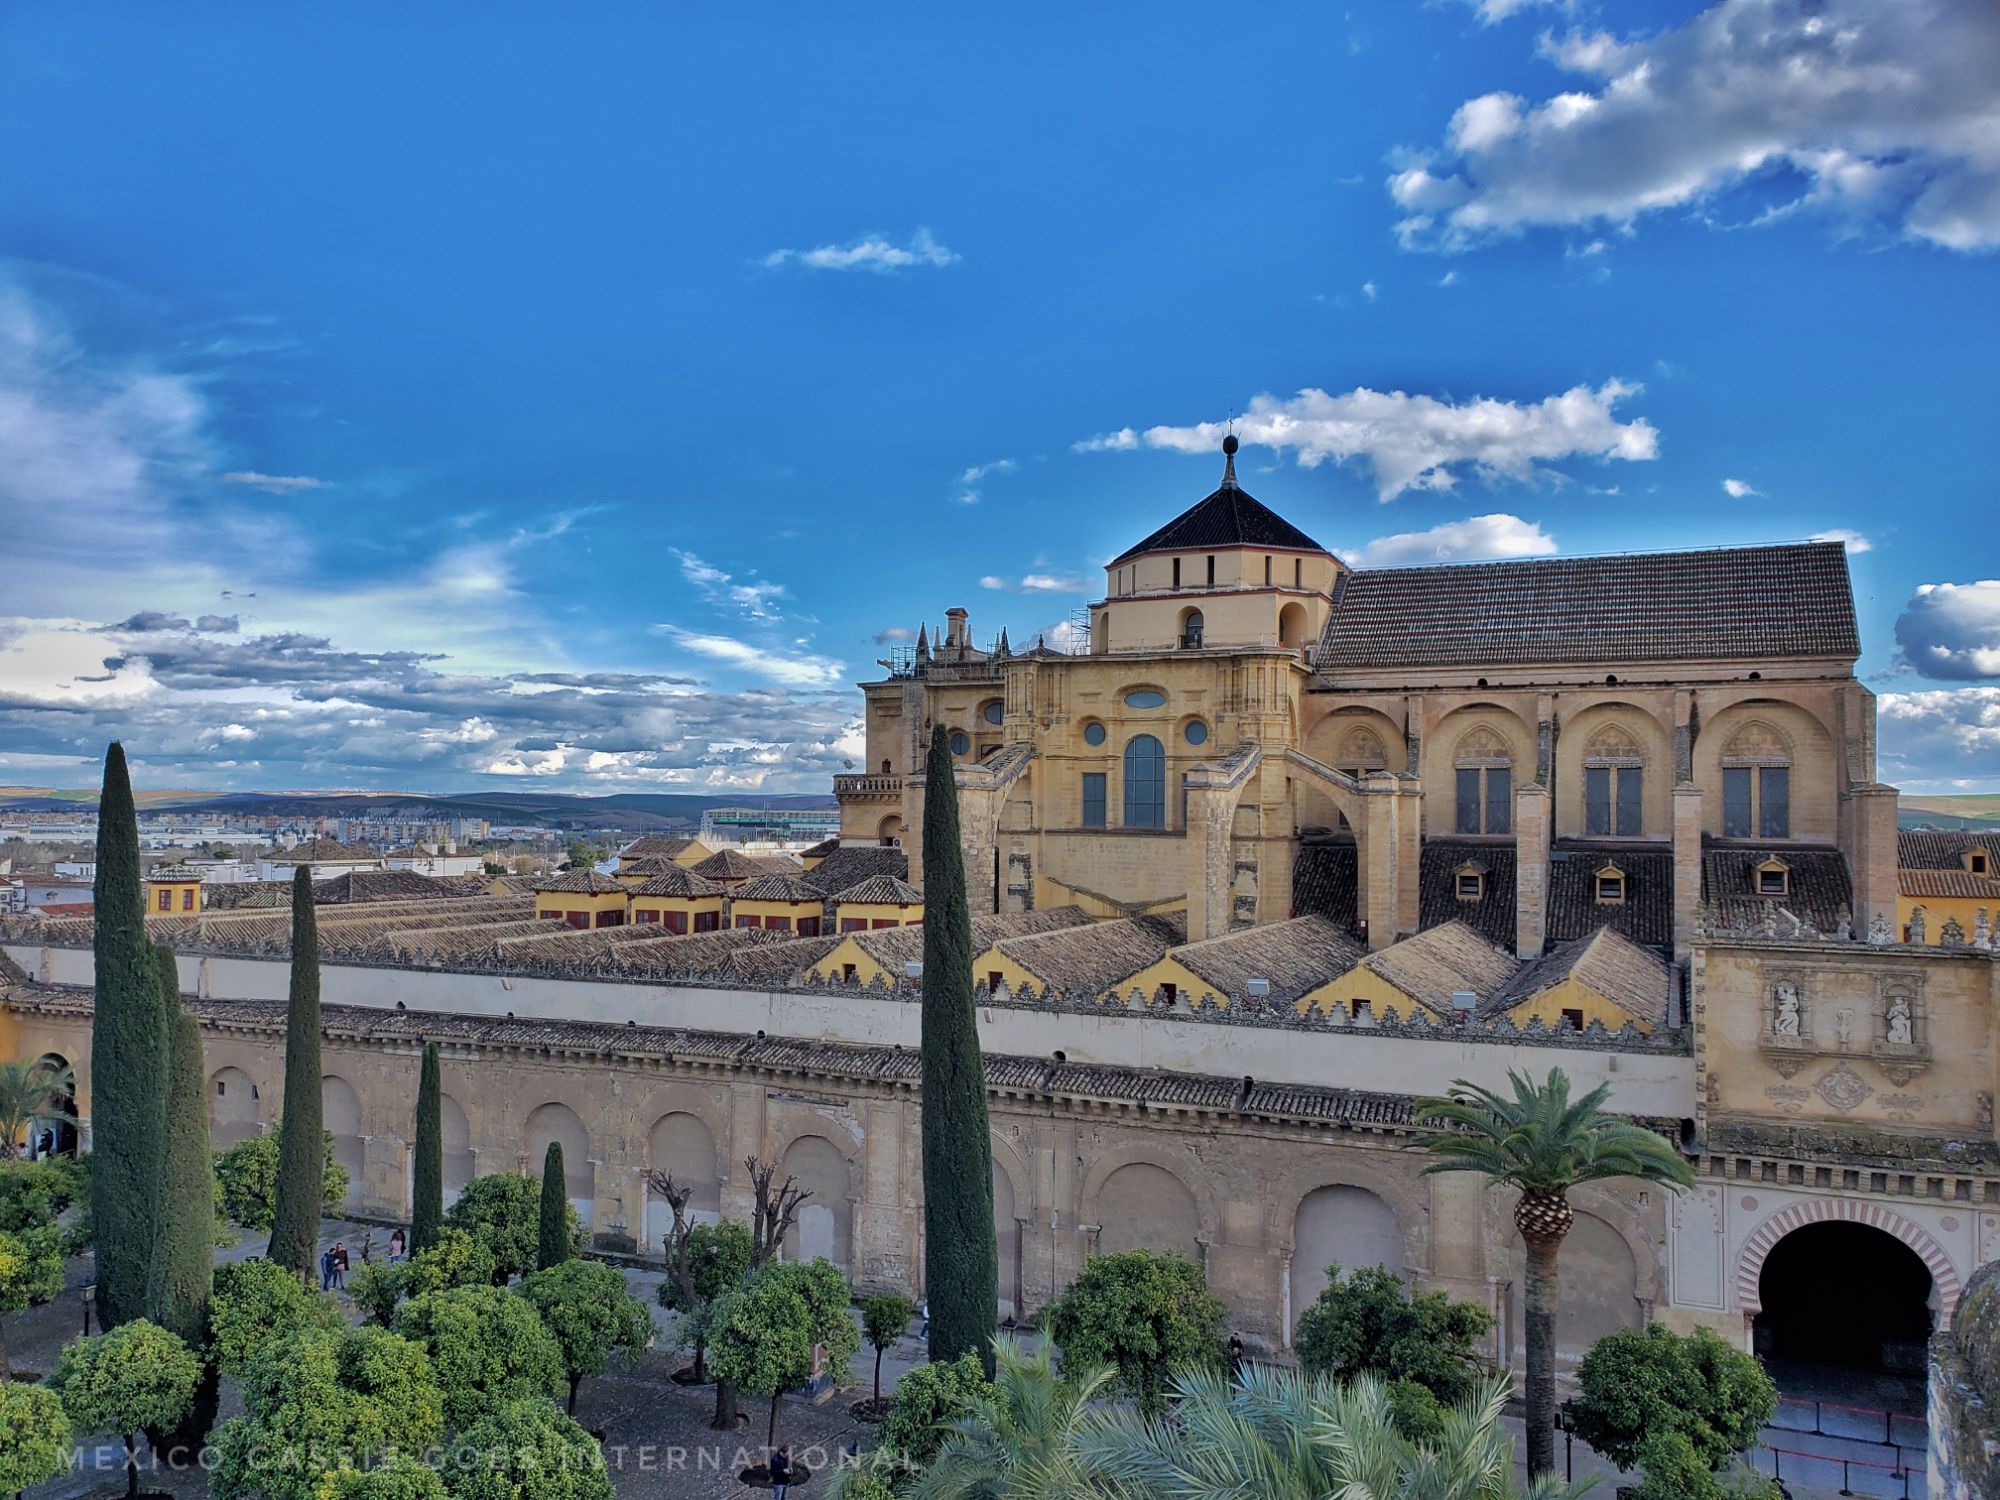 view looking over the mezquita of cordoba from above